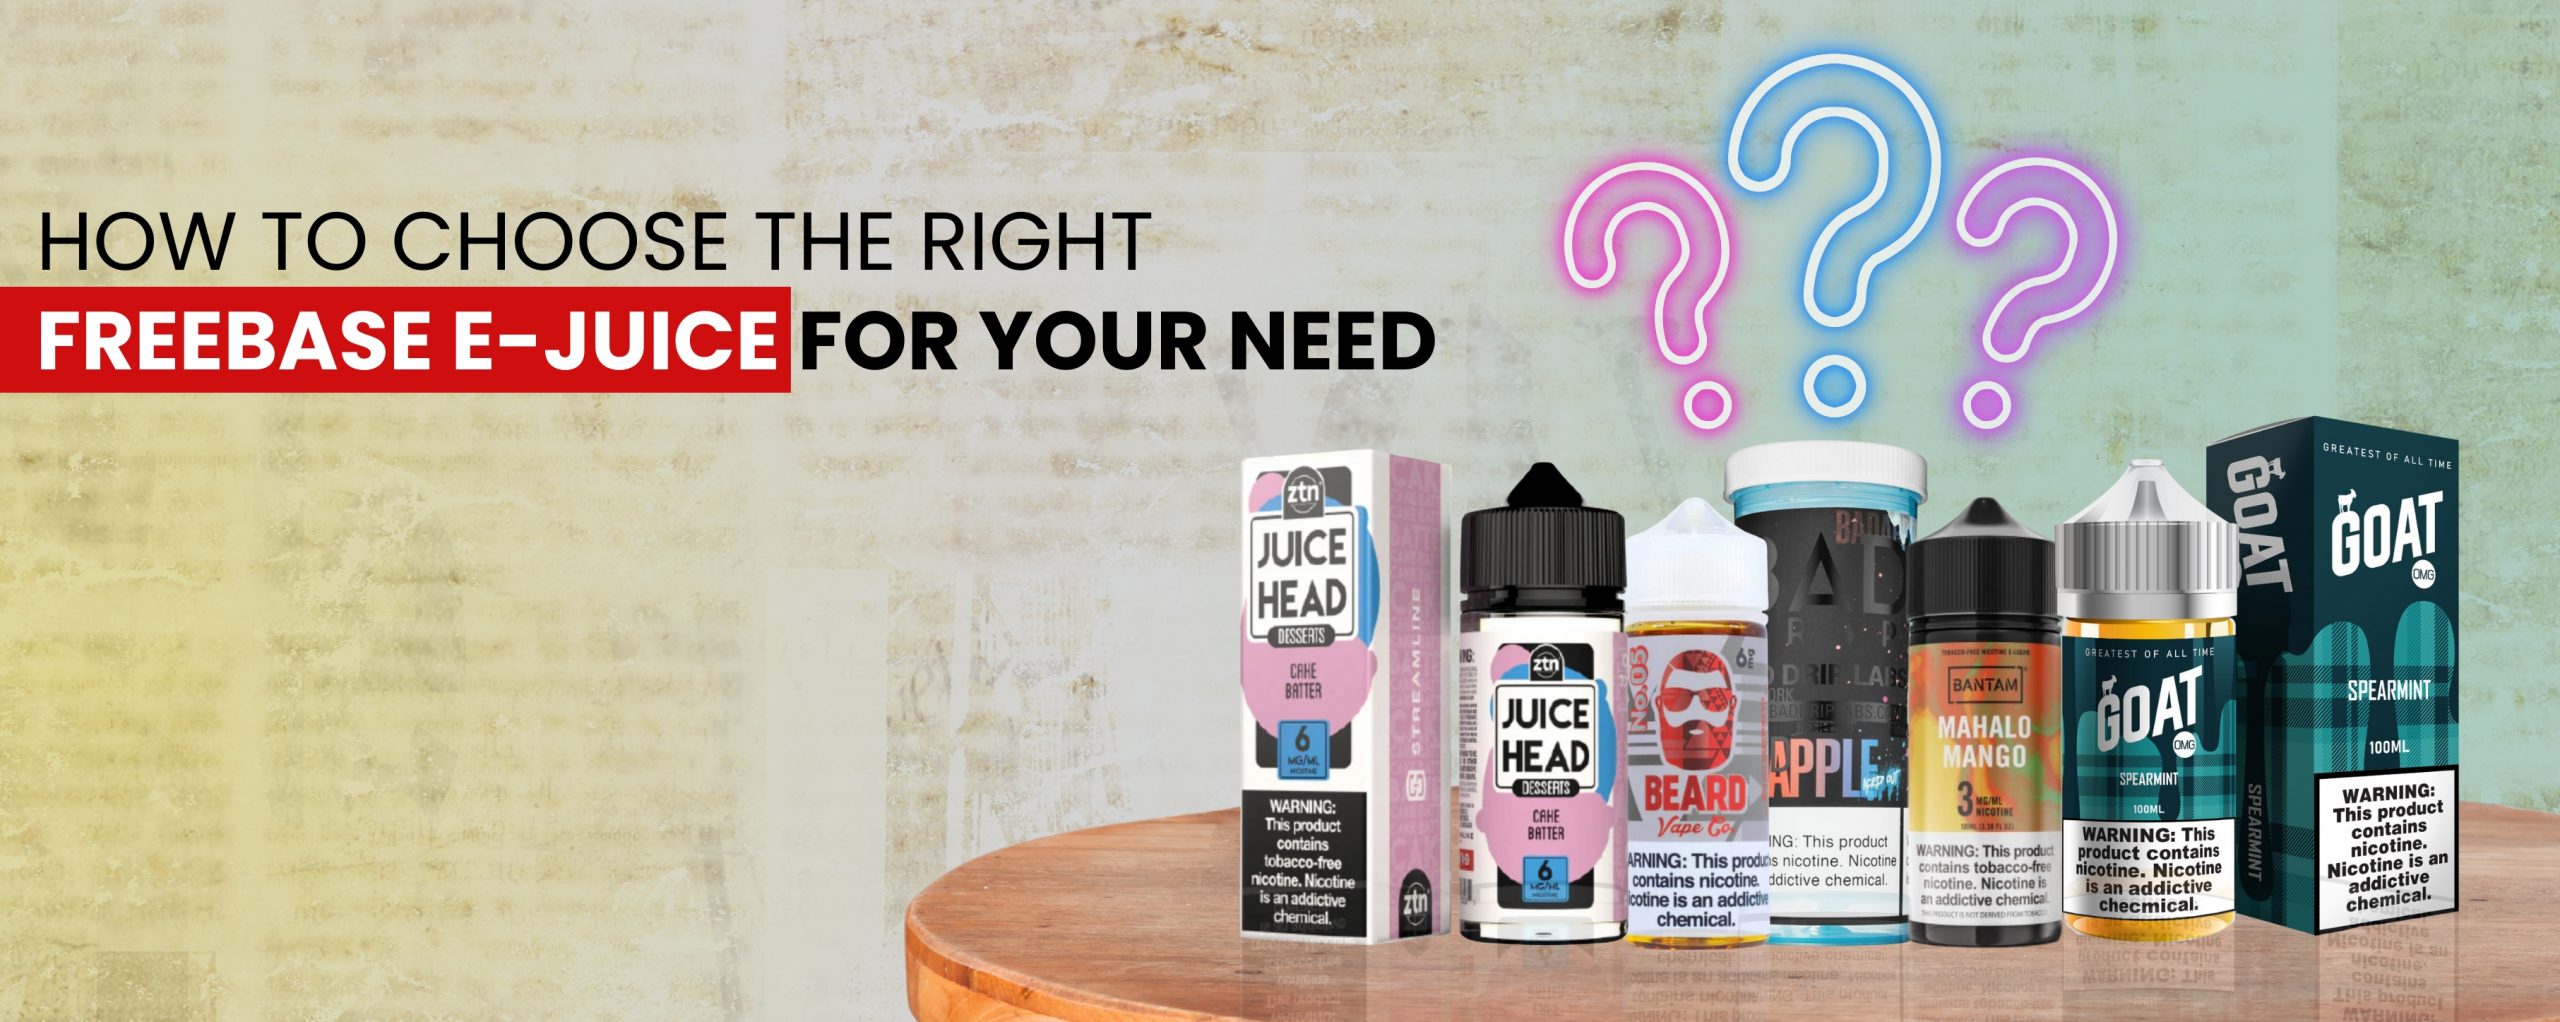 How To Choose The Right Freebase E-Juice For Your Need